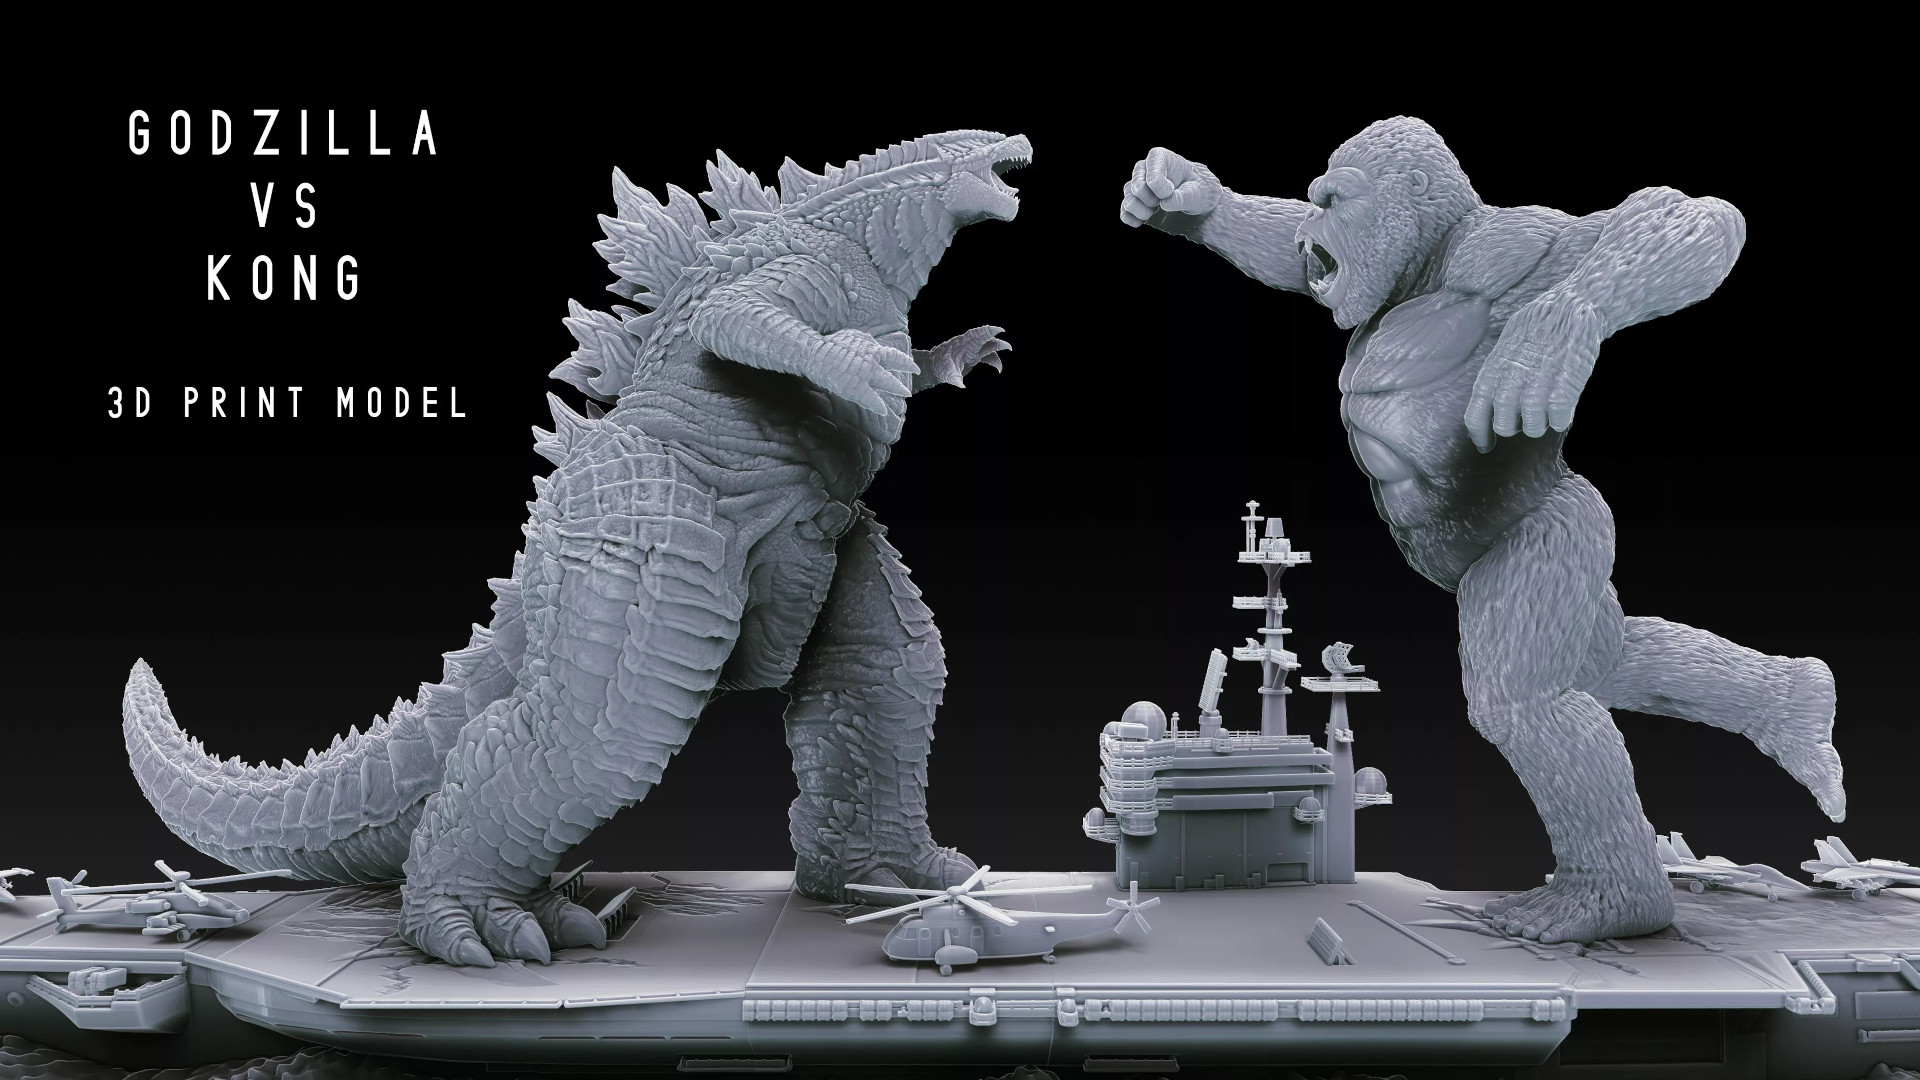 Diorama with 3D printed figurines of Godzilla fighting King Kong on an airship